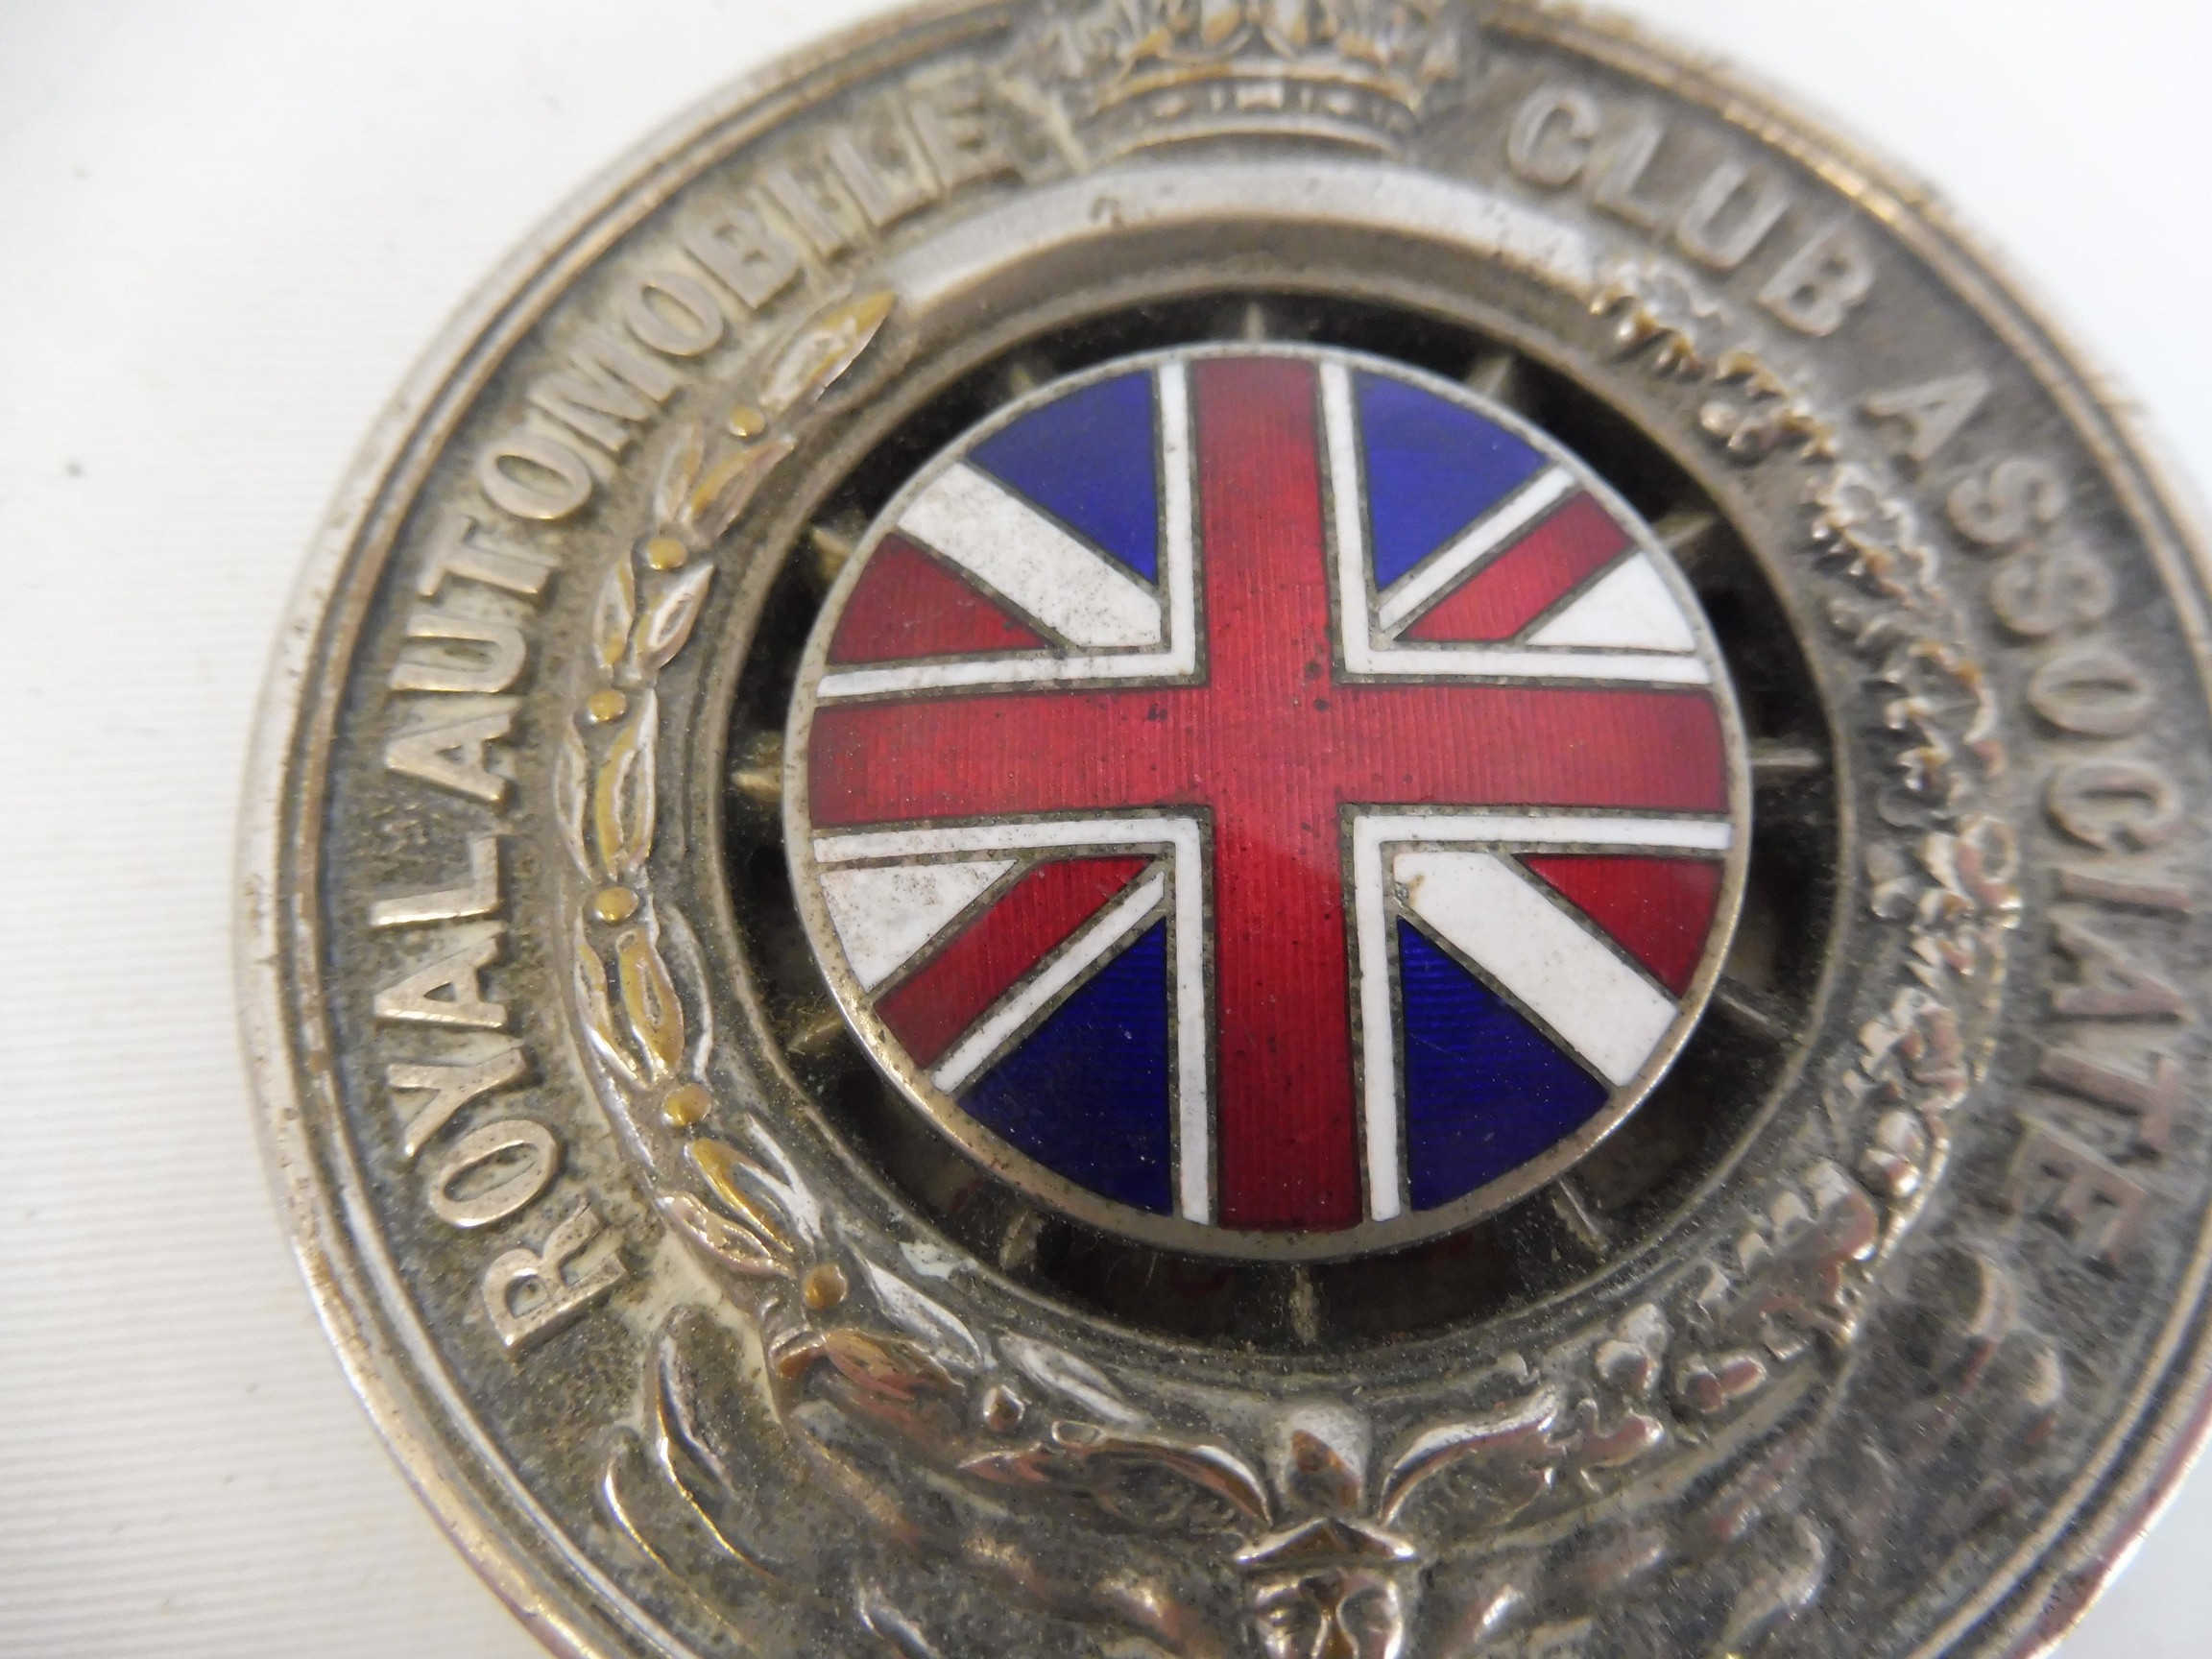 A small Royal Automobile Club Associate car badge with good enamel union jack centre, no. N5 5251, - Image 2 of 3